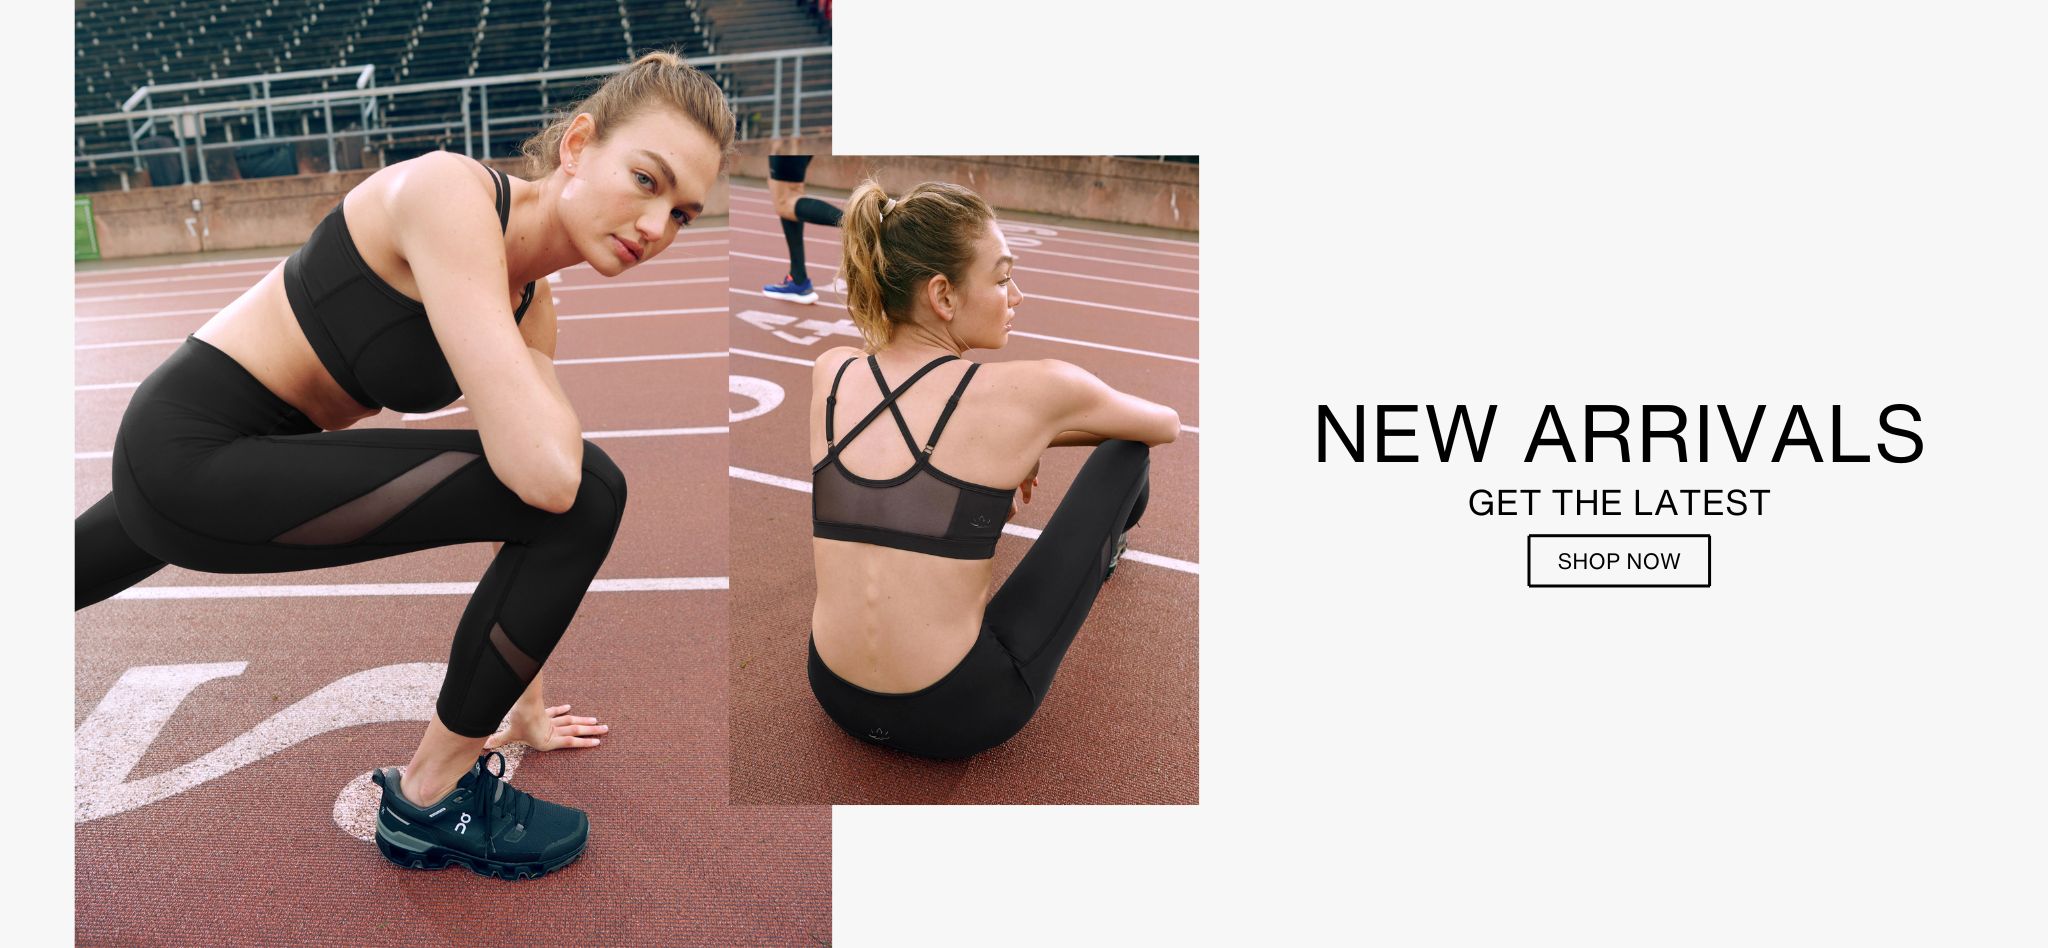 New Arrivals Showing Model on Running Track Wearing the Beyond Yoga Powerbeyond Bootcamp Midi Legging and Powerbeyond Bootcamp Bra in Black